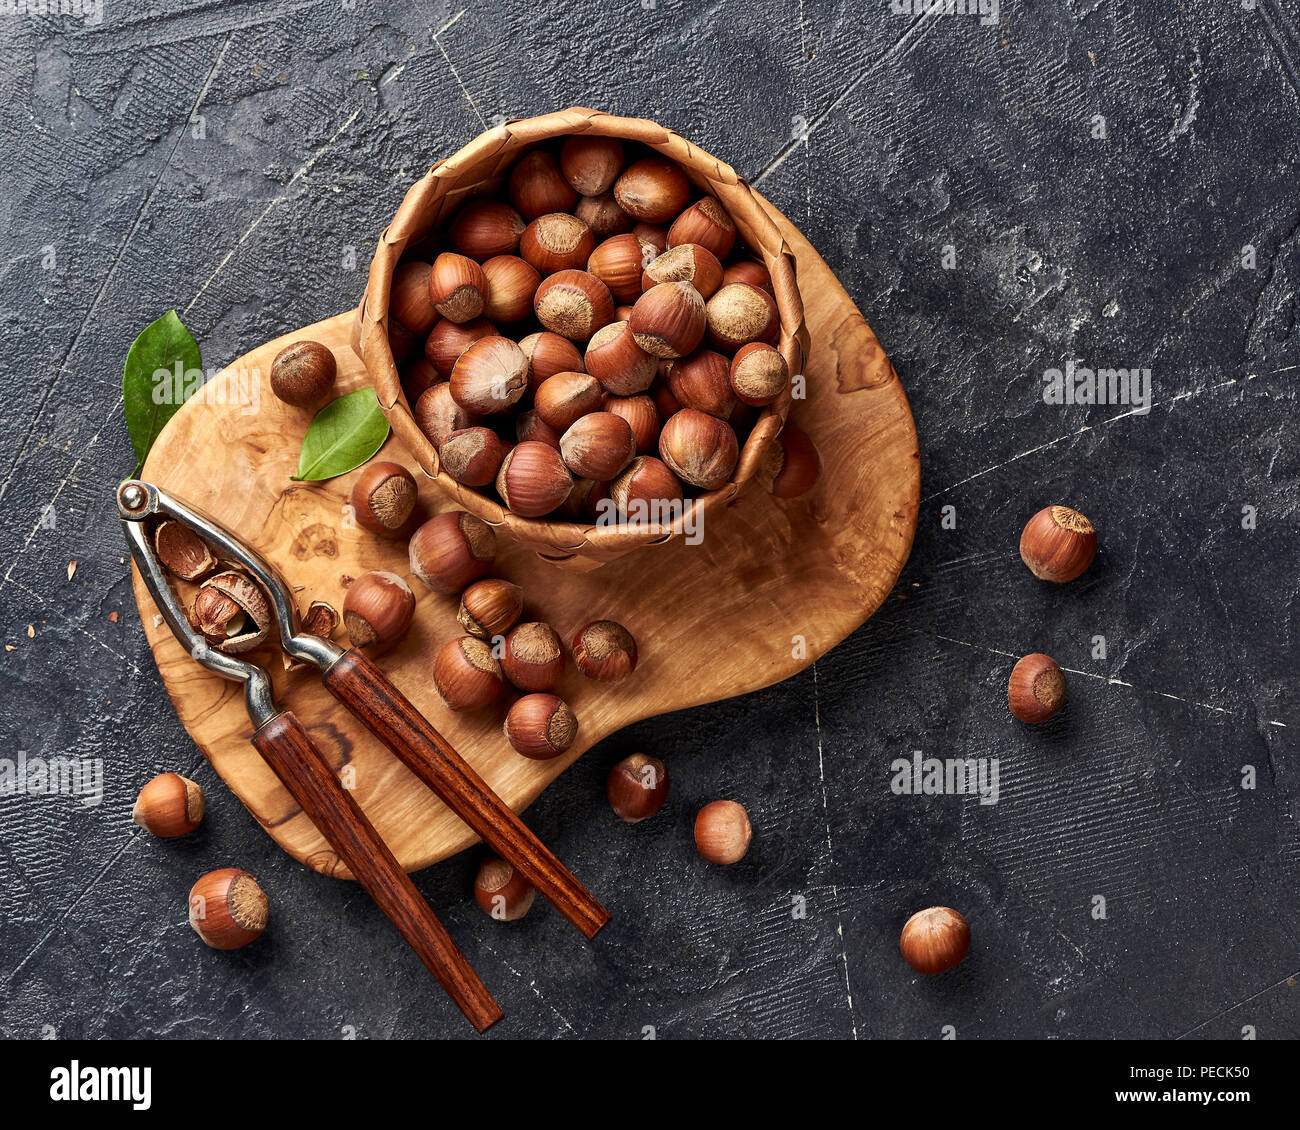 Hazelnut with nutcracker on olive wooden board. Nuts with green leaves. Top view. Stock Photo